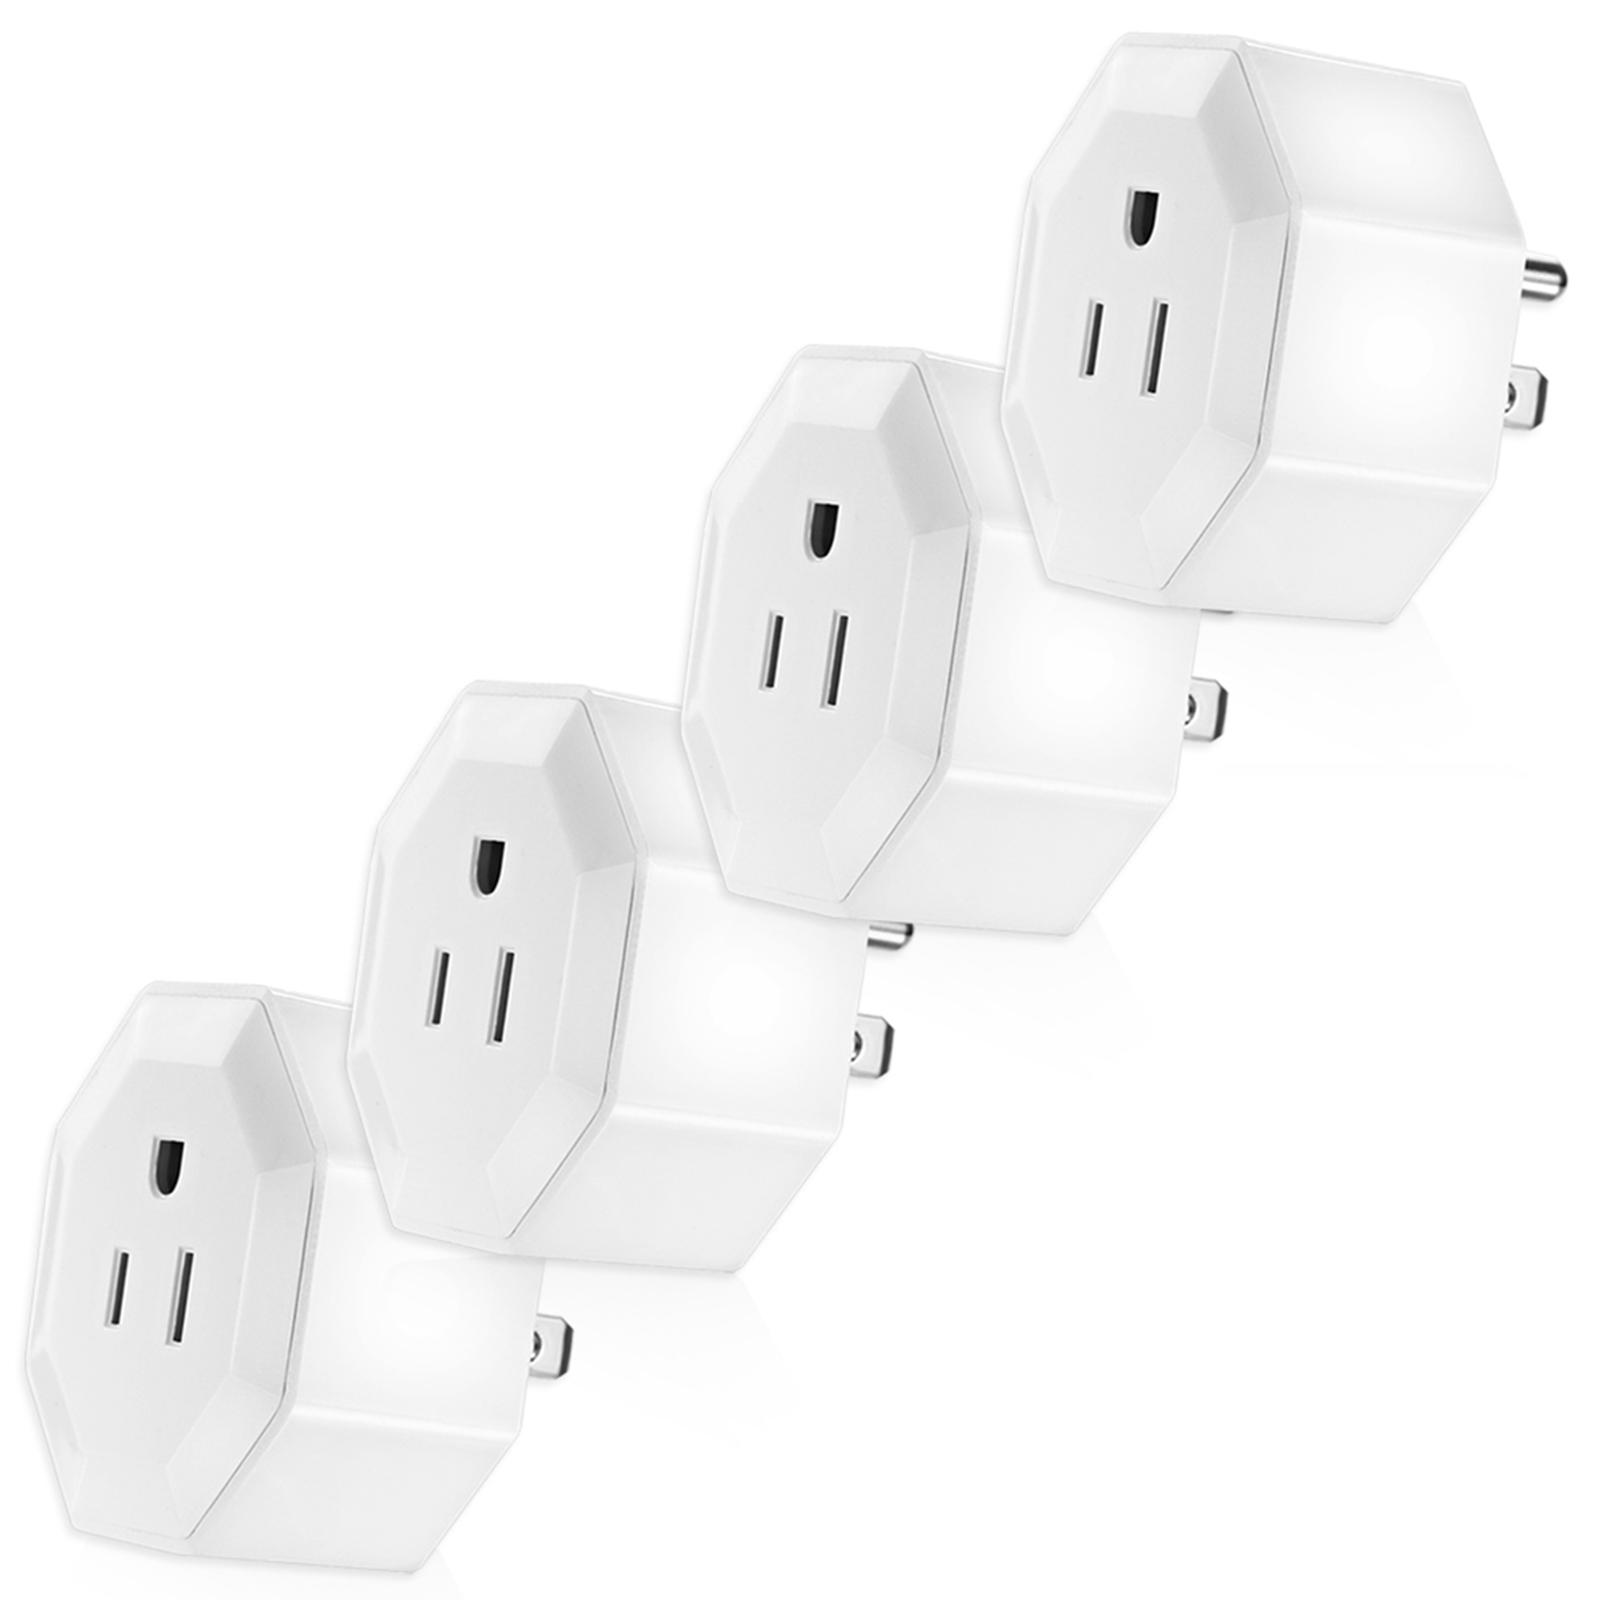 4PCS Wireless WIFI Smart Plug US Outlet WI-FI Socket Charging Adapter Smart Home Power Plug Remote Control Via Phone App Smart Timer Compatible with for Amazon Alexa and for Google Home/Nest IFTTT For TP-Link